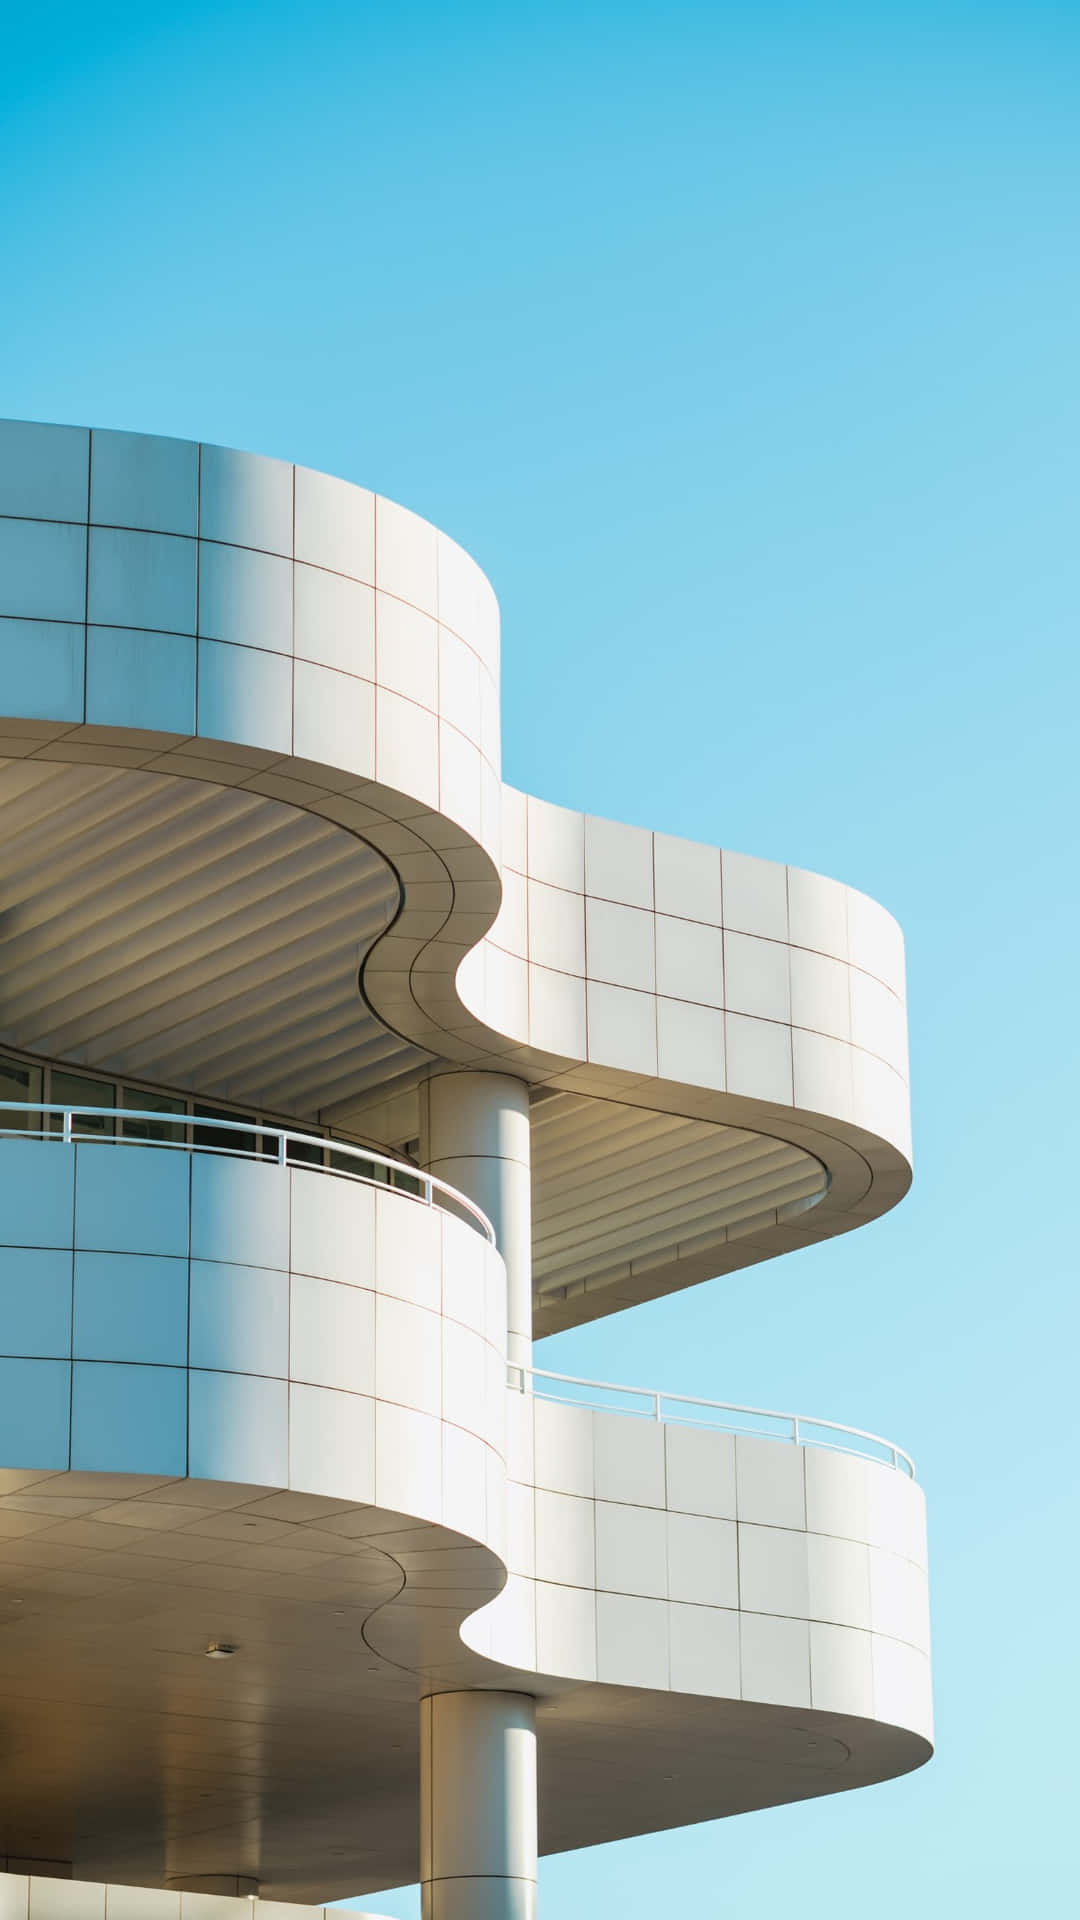 Download Getty Center Architectural Curves Wallpaper | Wallpapers.com